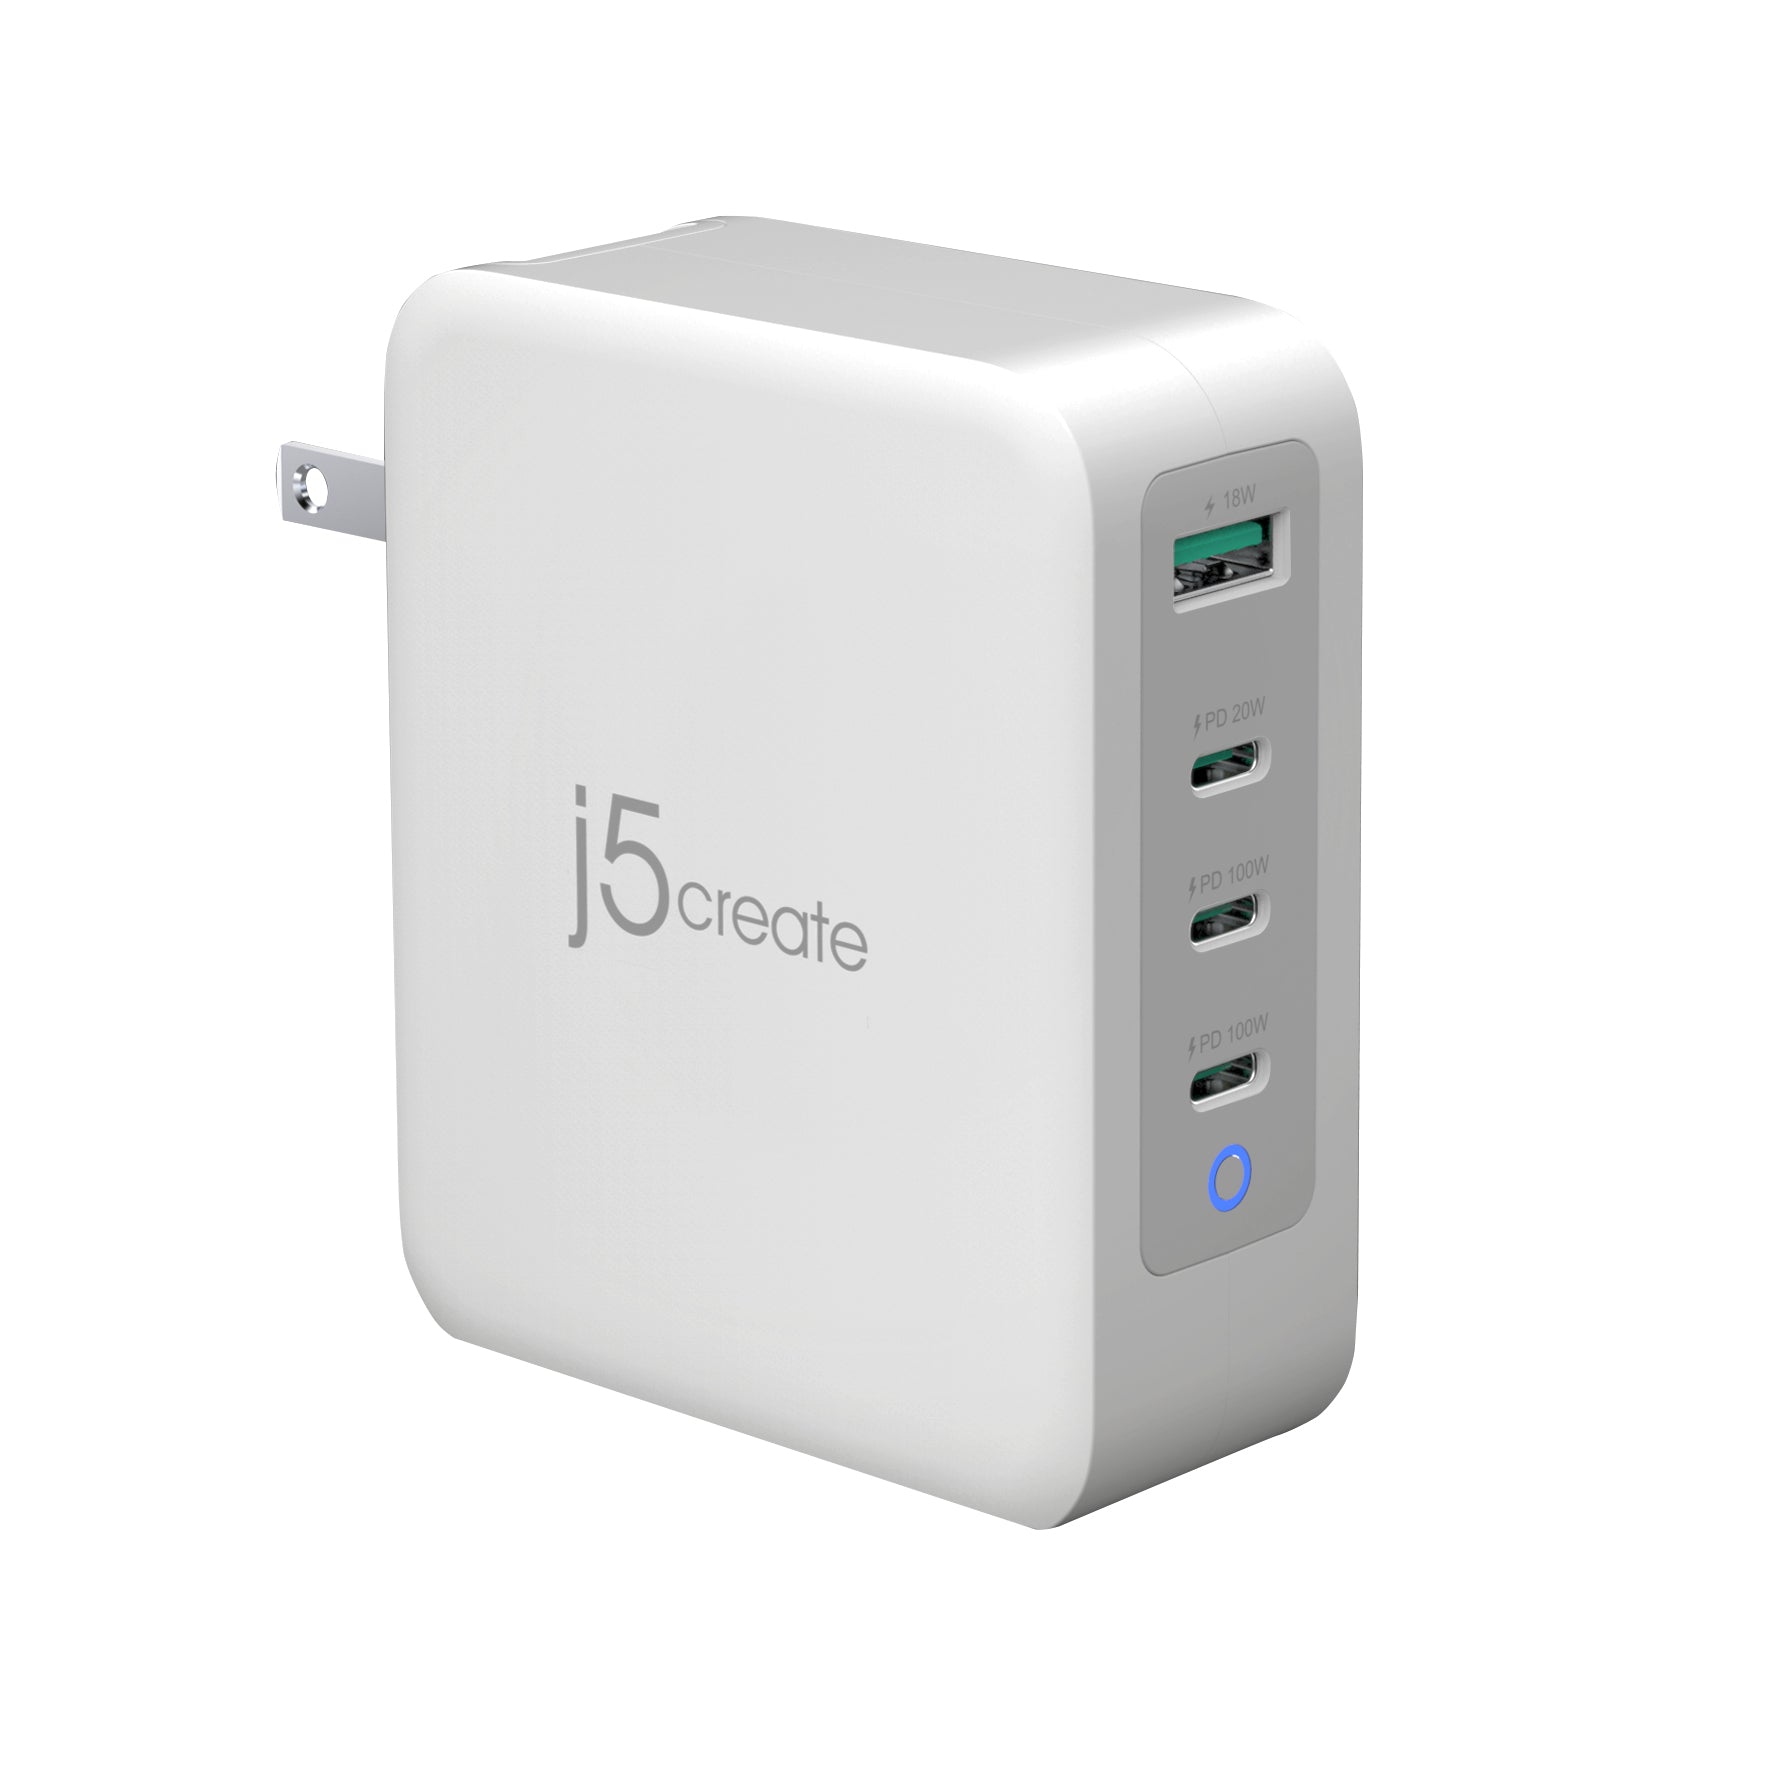 Multi USB Charger, 6 Port USB Charging Station for Multiple Devices, Phone,  Tablet, Power Strip with ON/Off Switch (White)